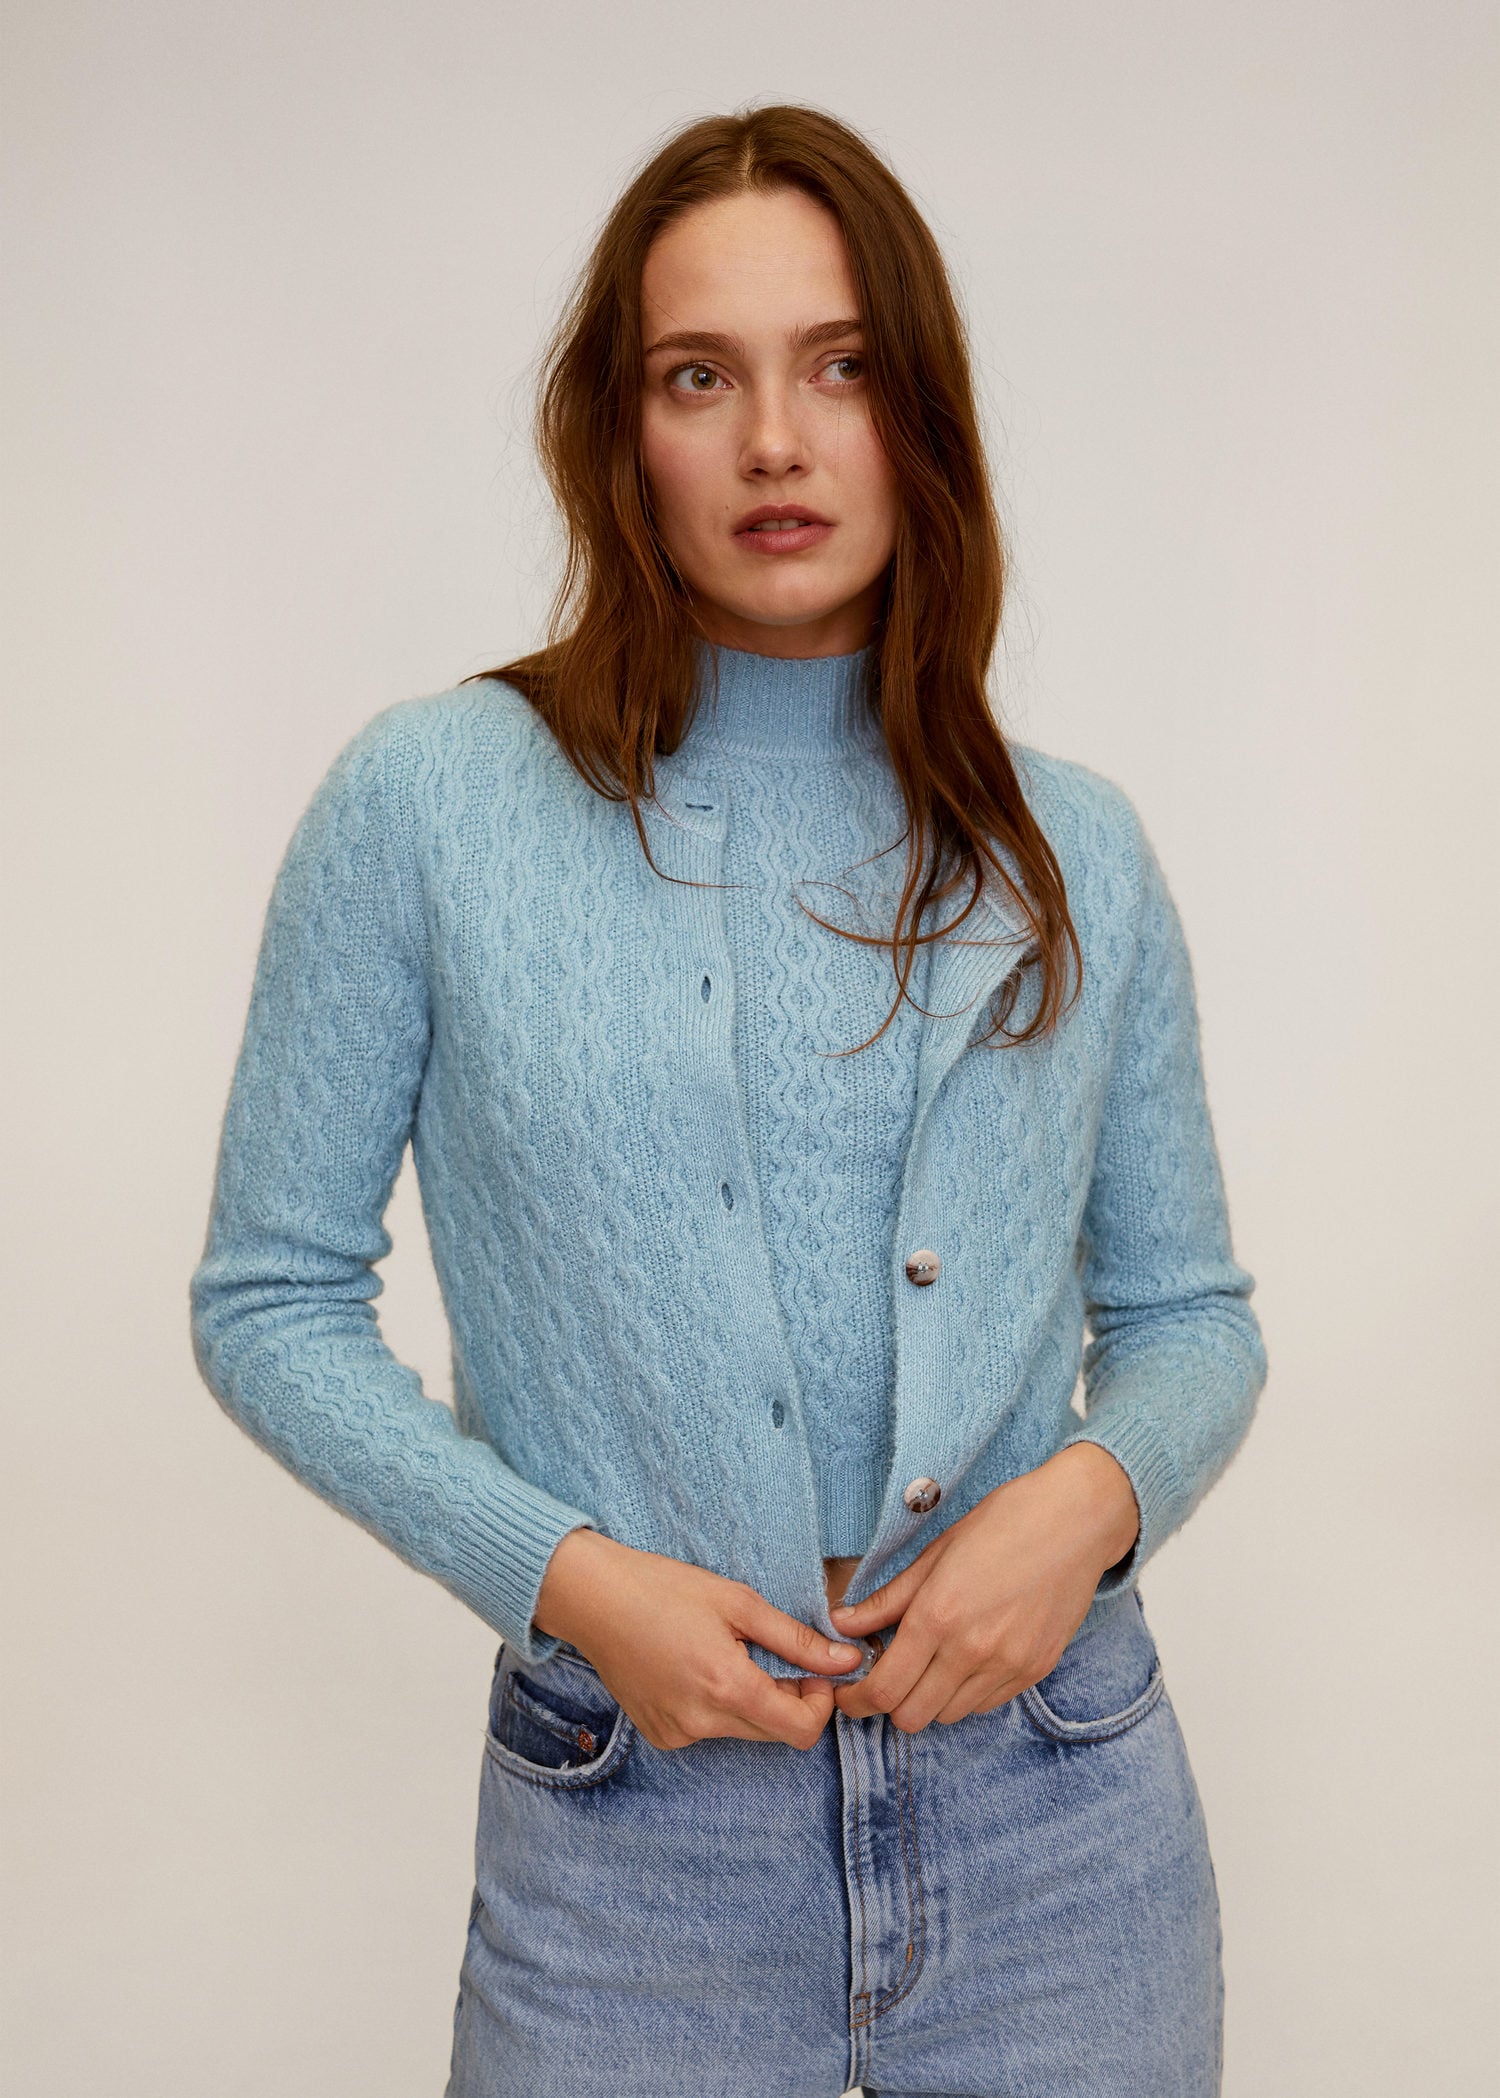 The 7 Best Matching Sweater Sets for Spring